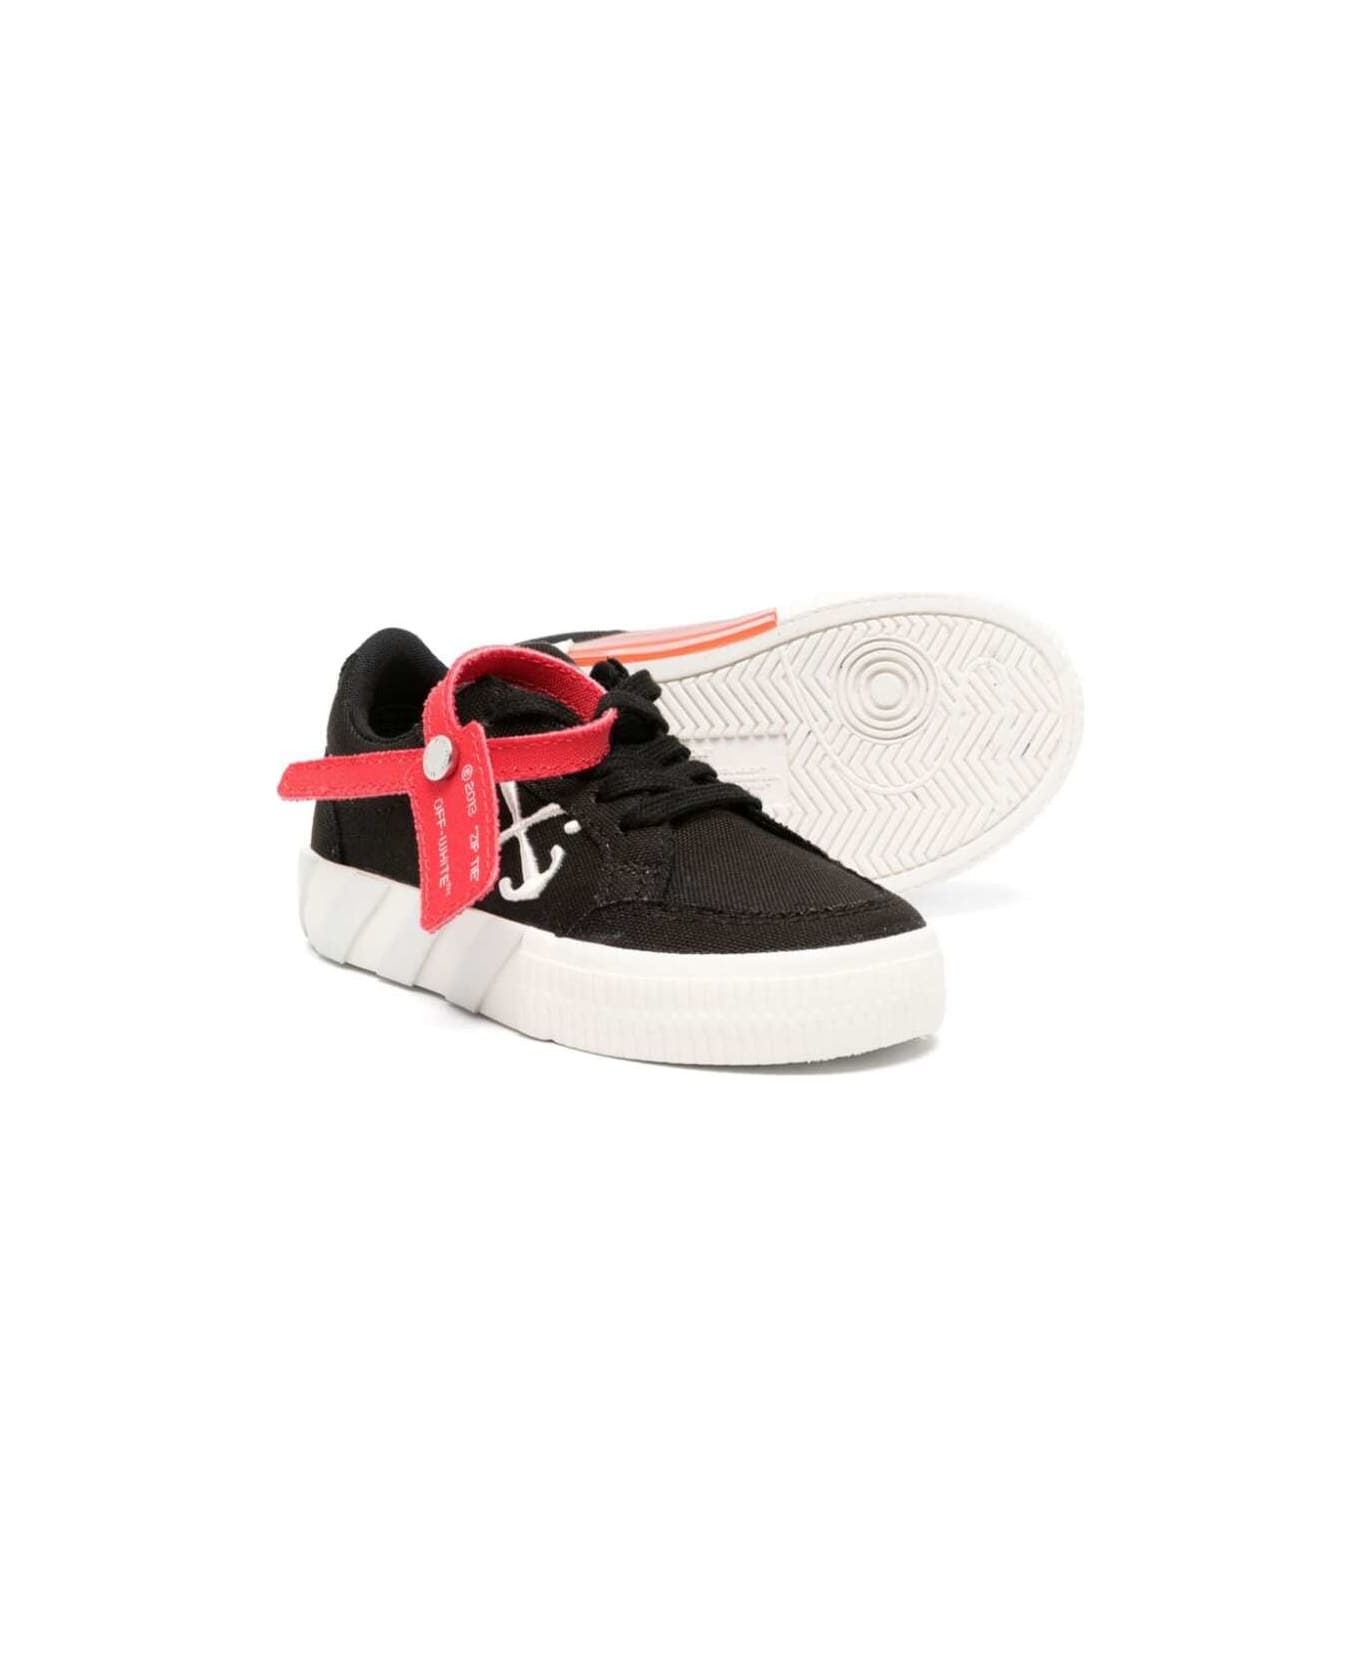 Off-White Black Low Top Sneakers In Cotton Girl - Black シューズ